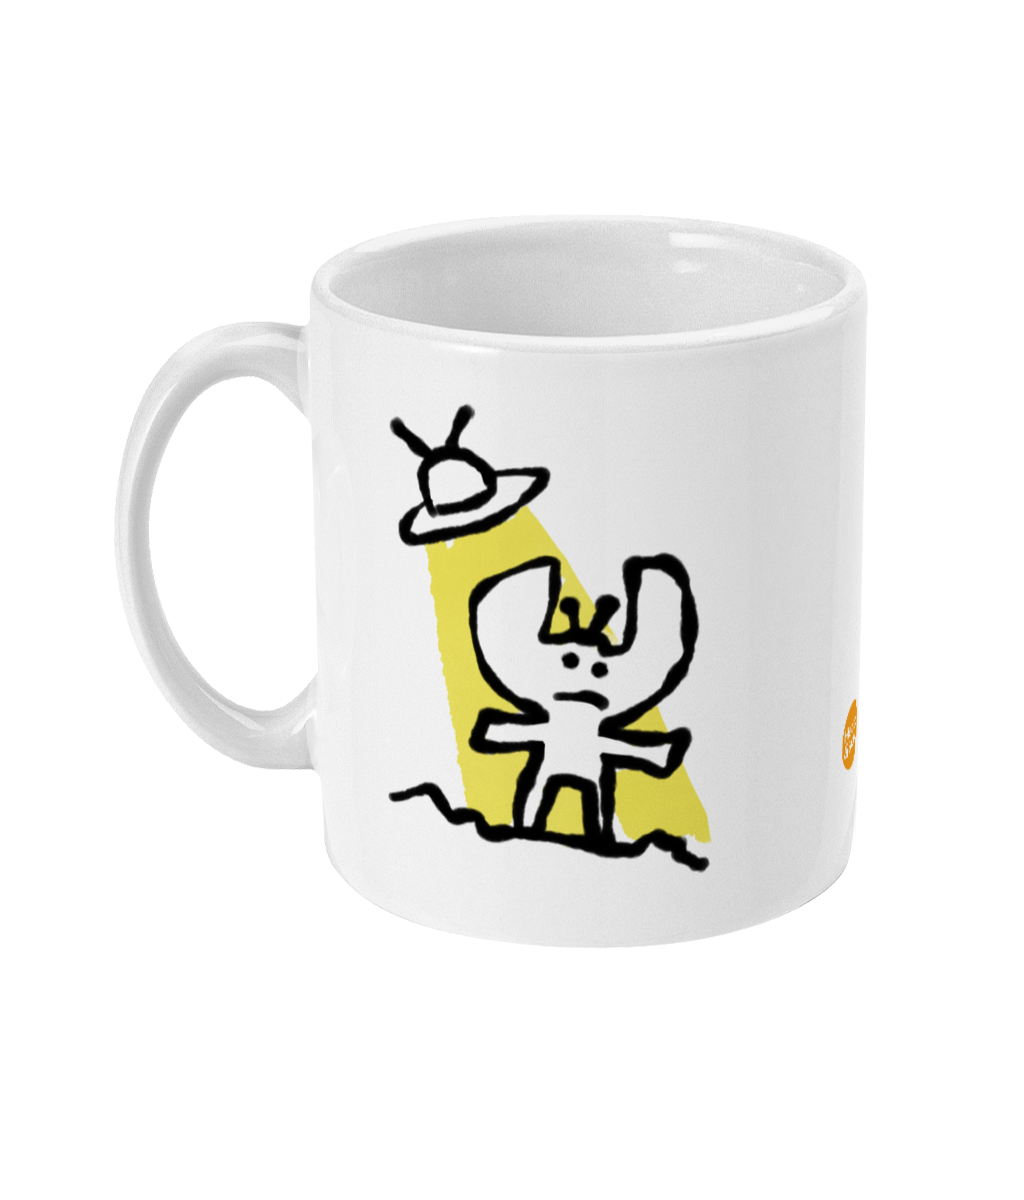 Cute Alien design coffee mug by Hector and Bone Left View